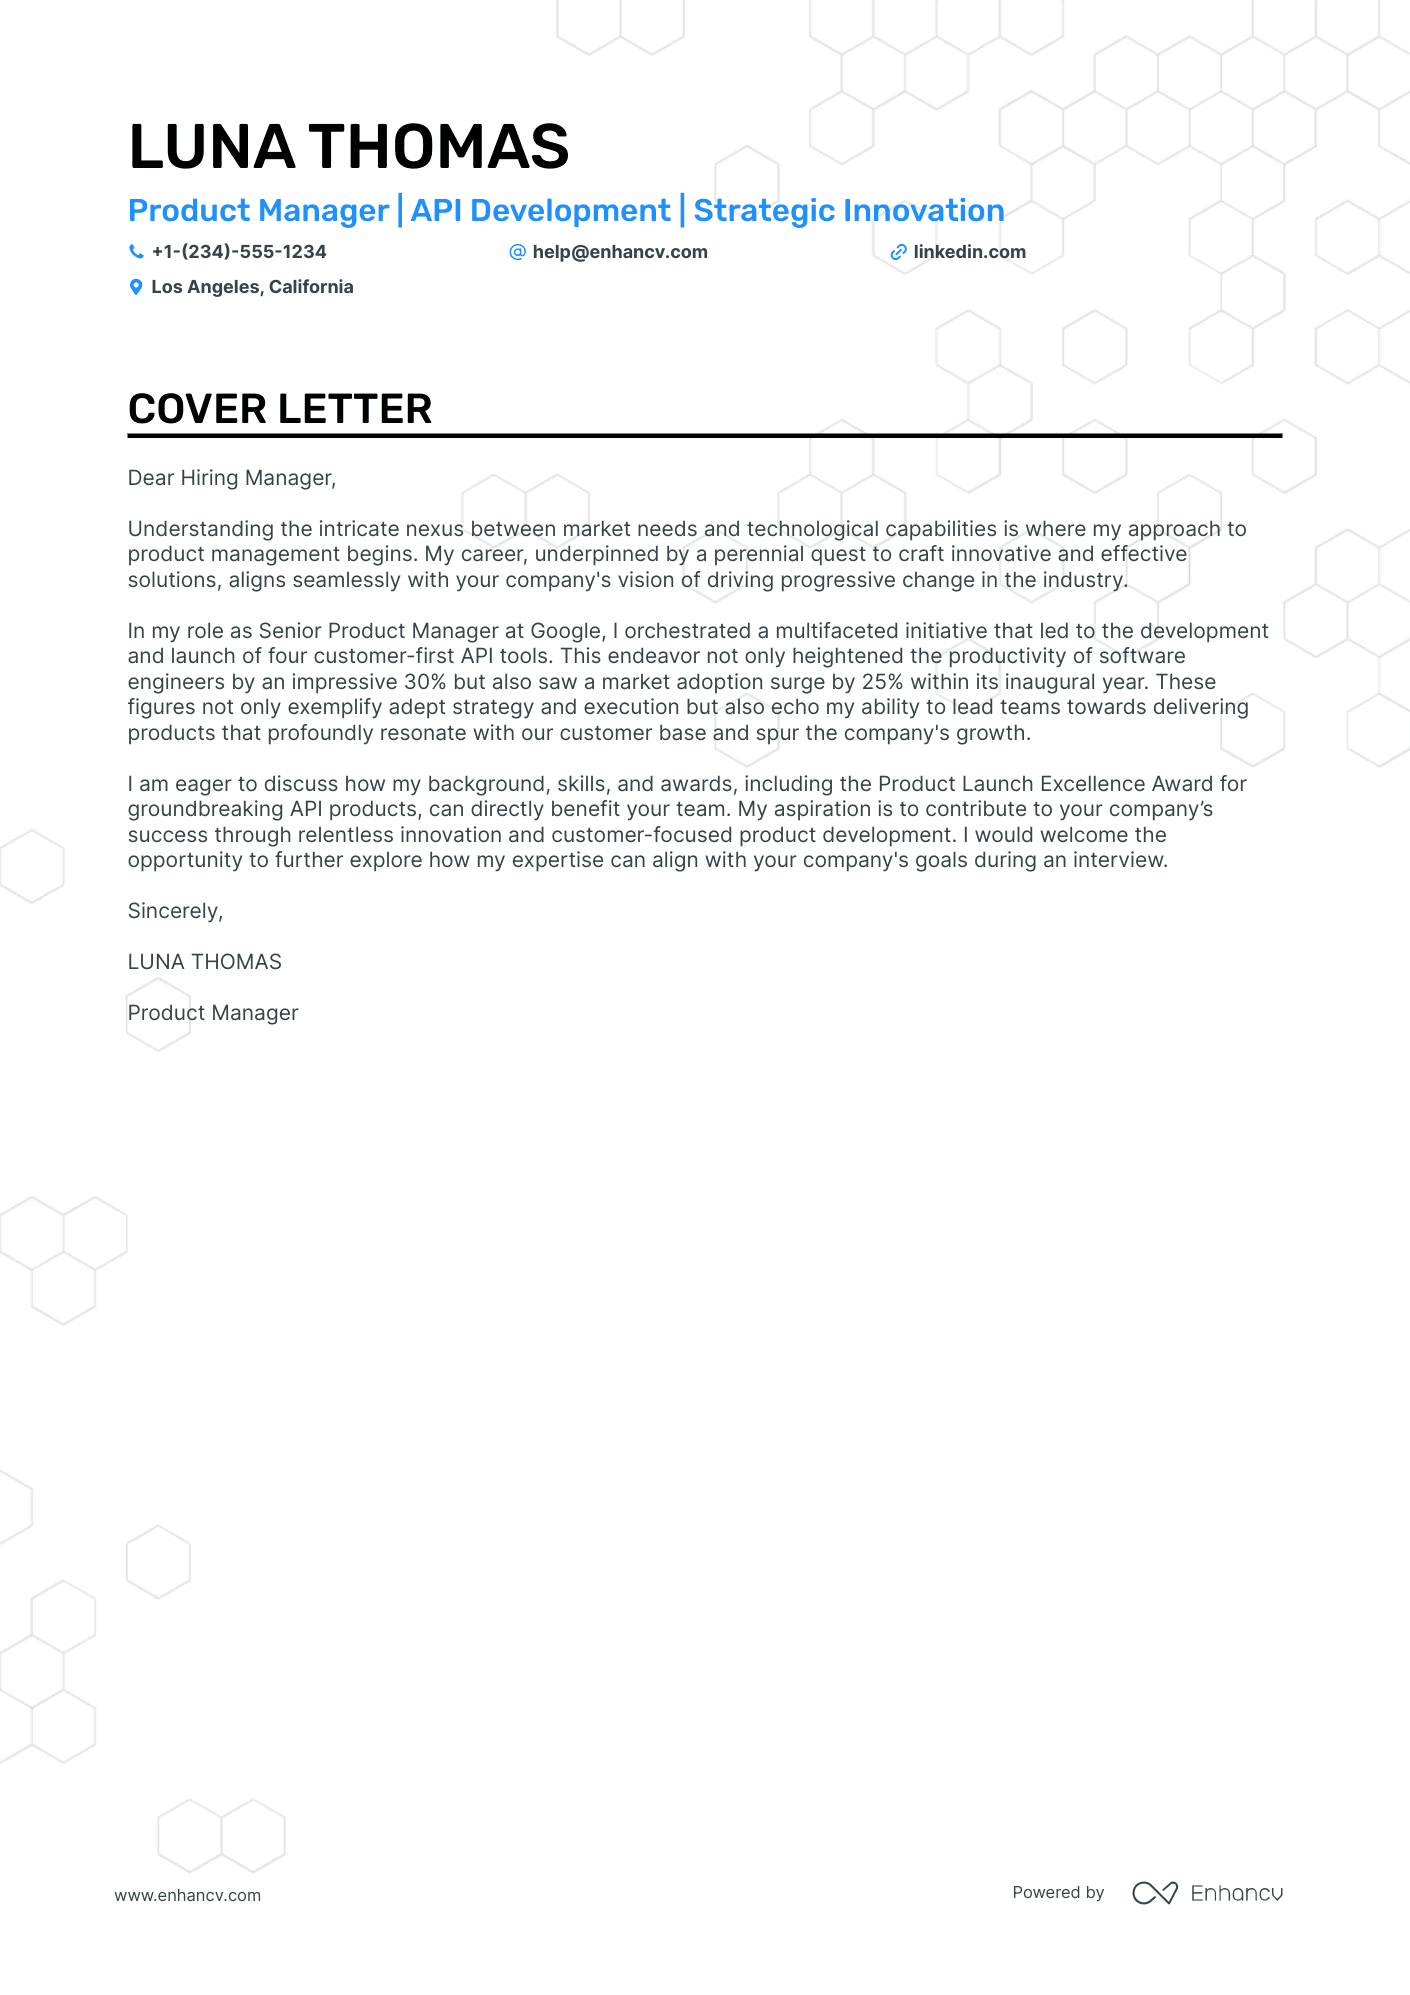 Api Product Manager cover letter